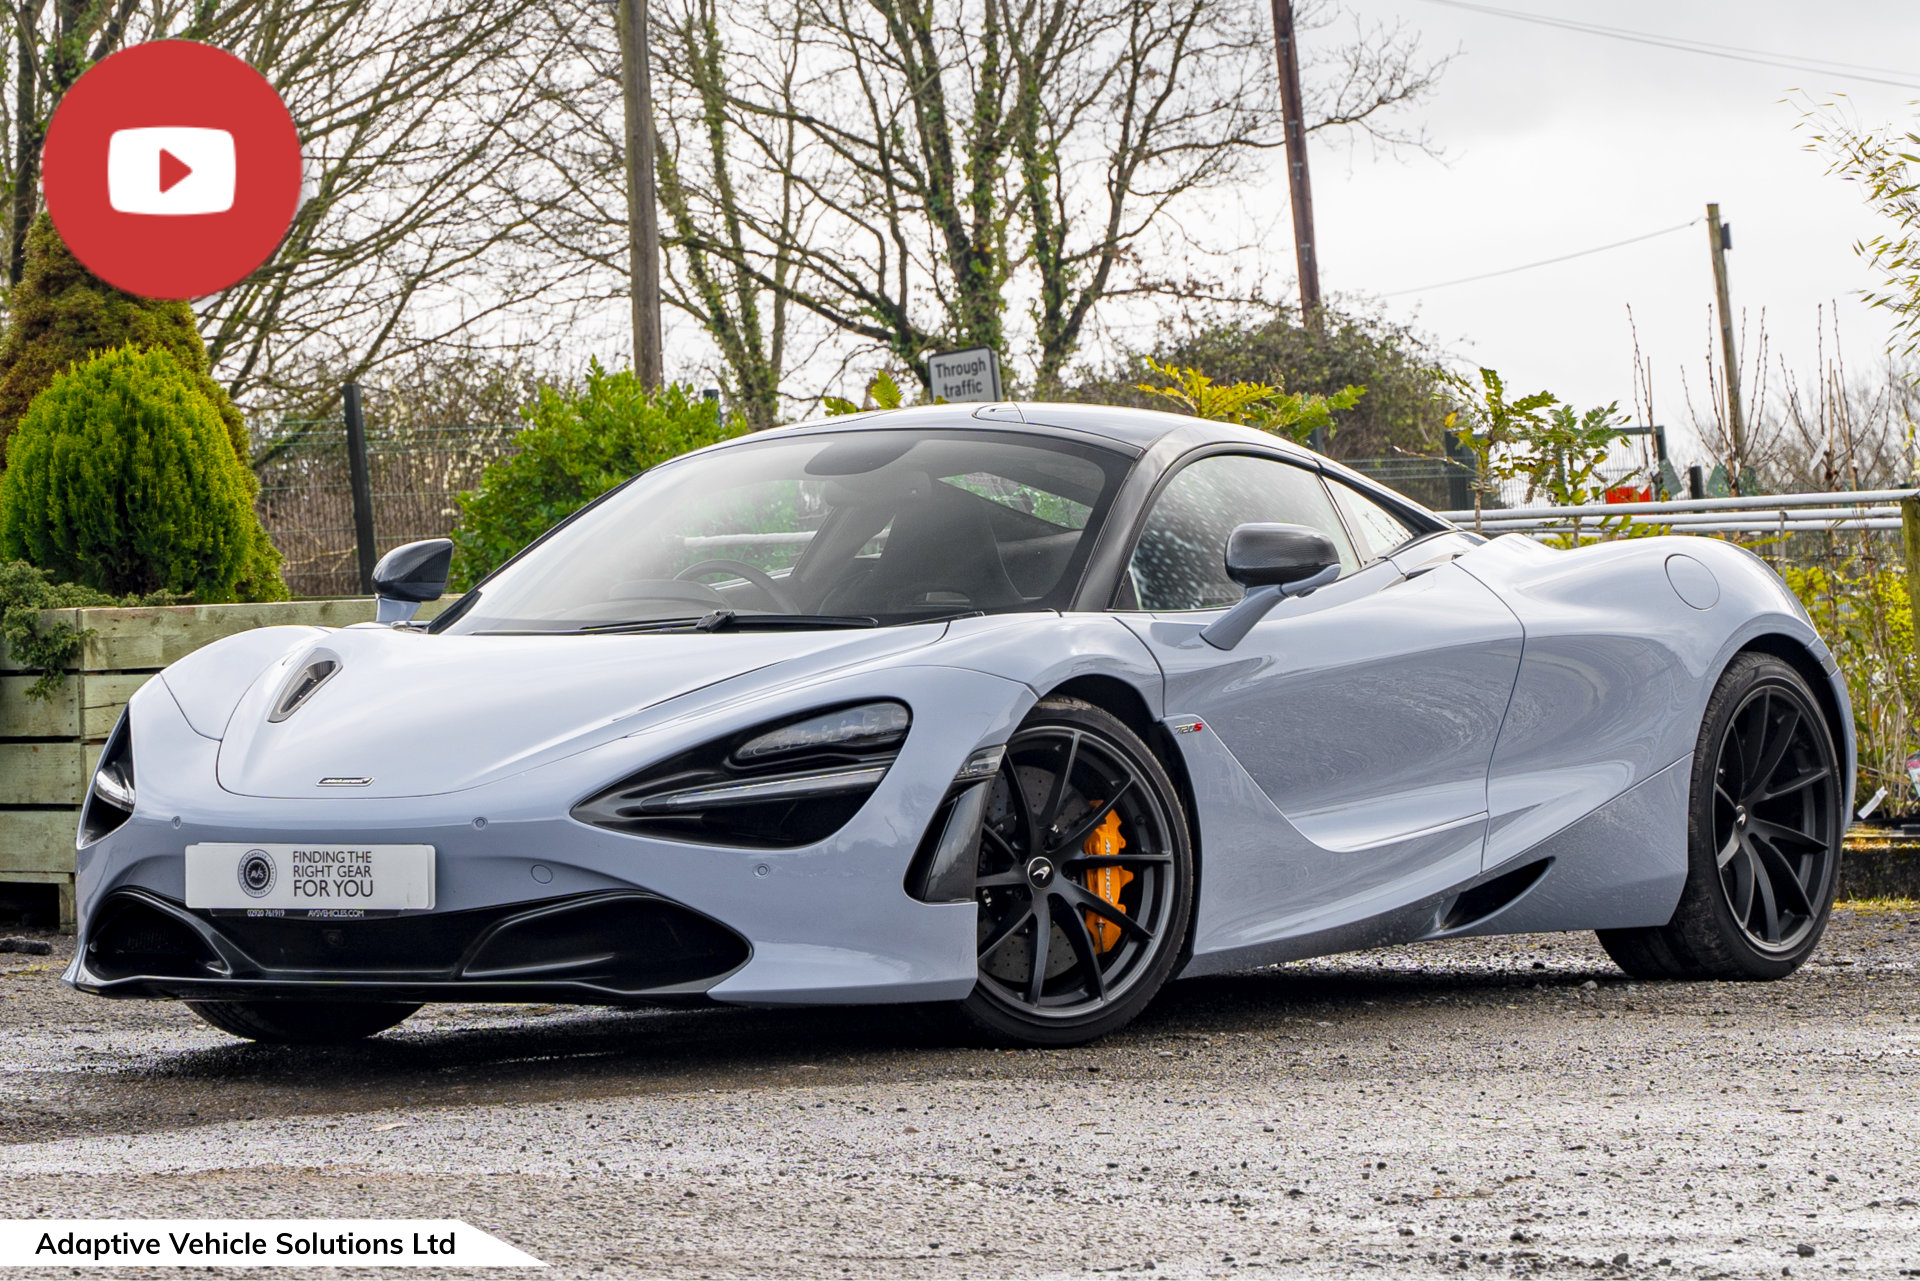 2021 McLaren 720s Performance Coupe near side front video